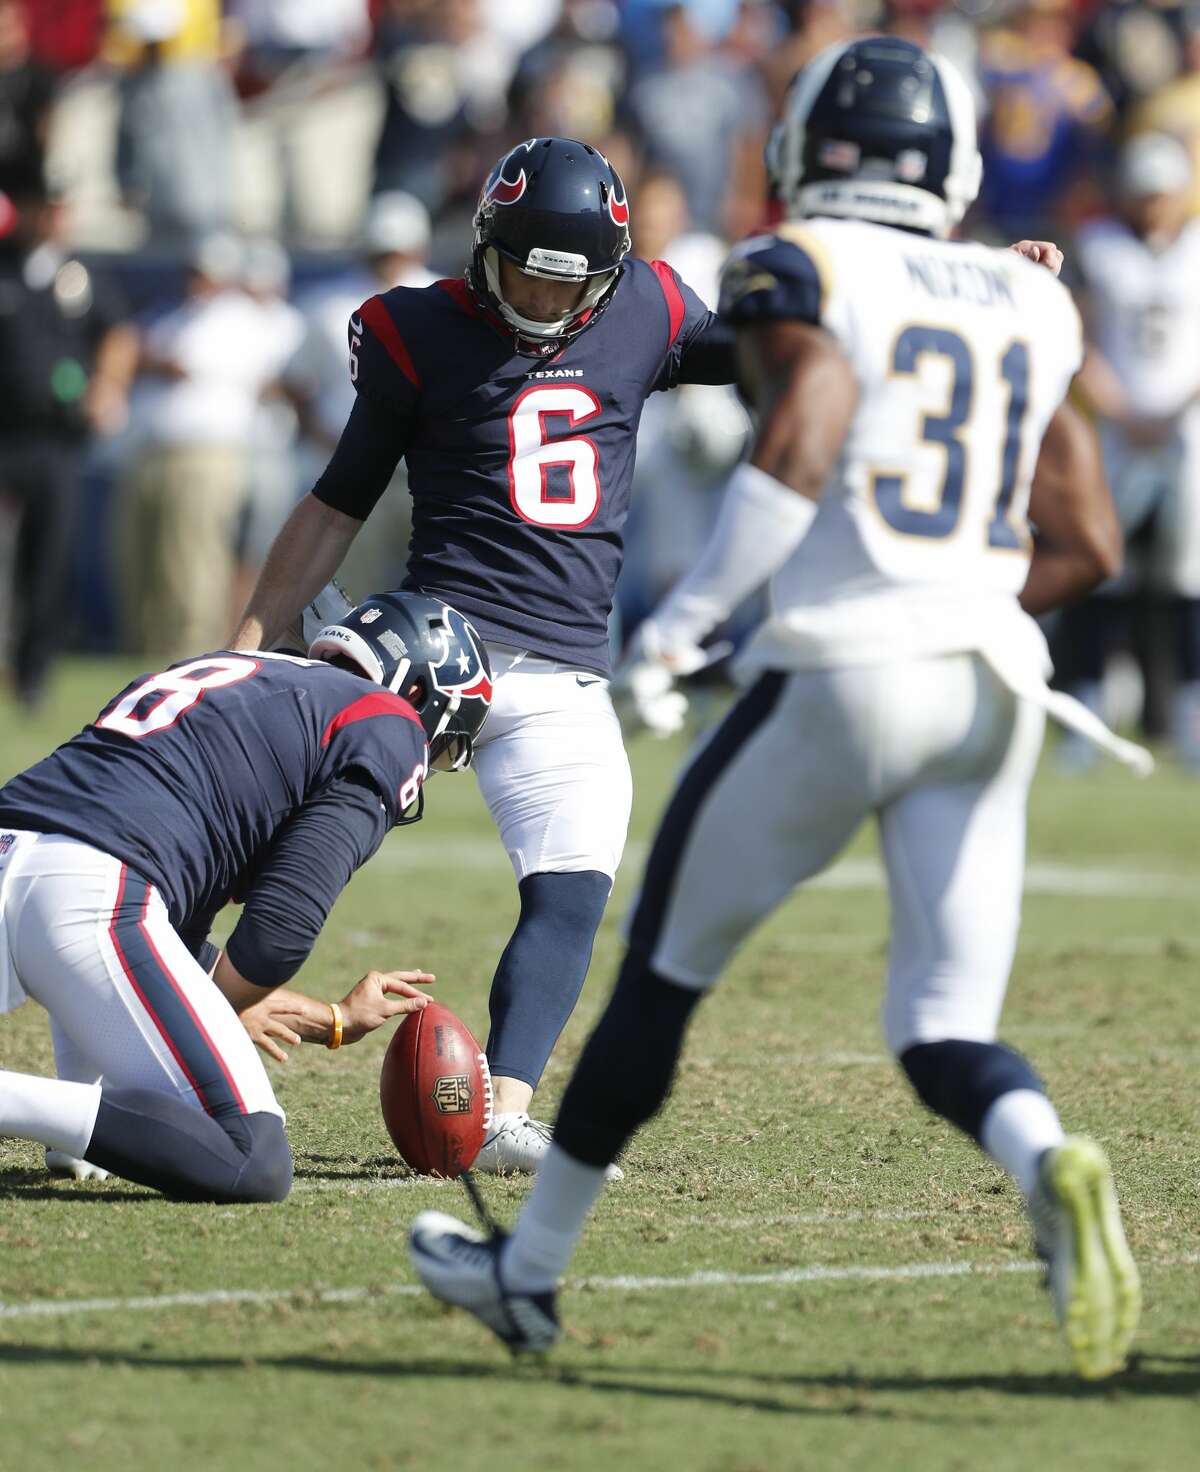 Houston Texans kicker Nick Rose (6) attempts a 57-yard field goal against the Los Angeles Rams that he did not convert during the fourth quarter of an NFL preseason football game at the Los Angeles Memorial Coliseum on Saturday, Aug. 25, 2018, in Los Angeles.